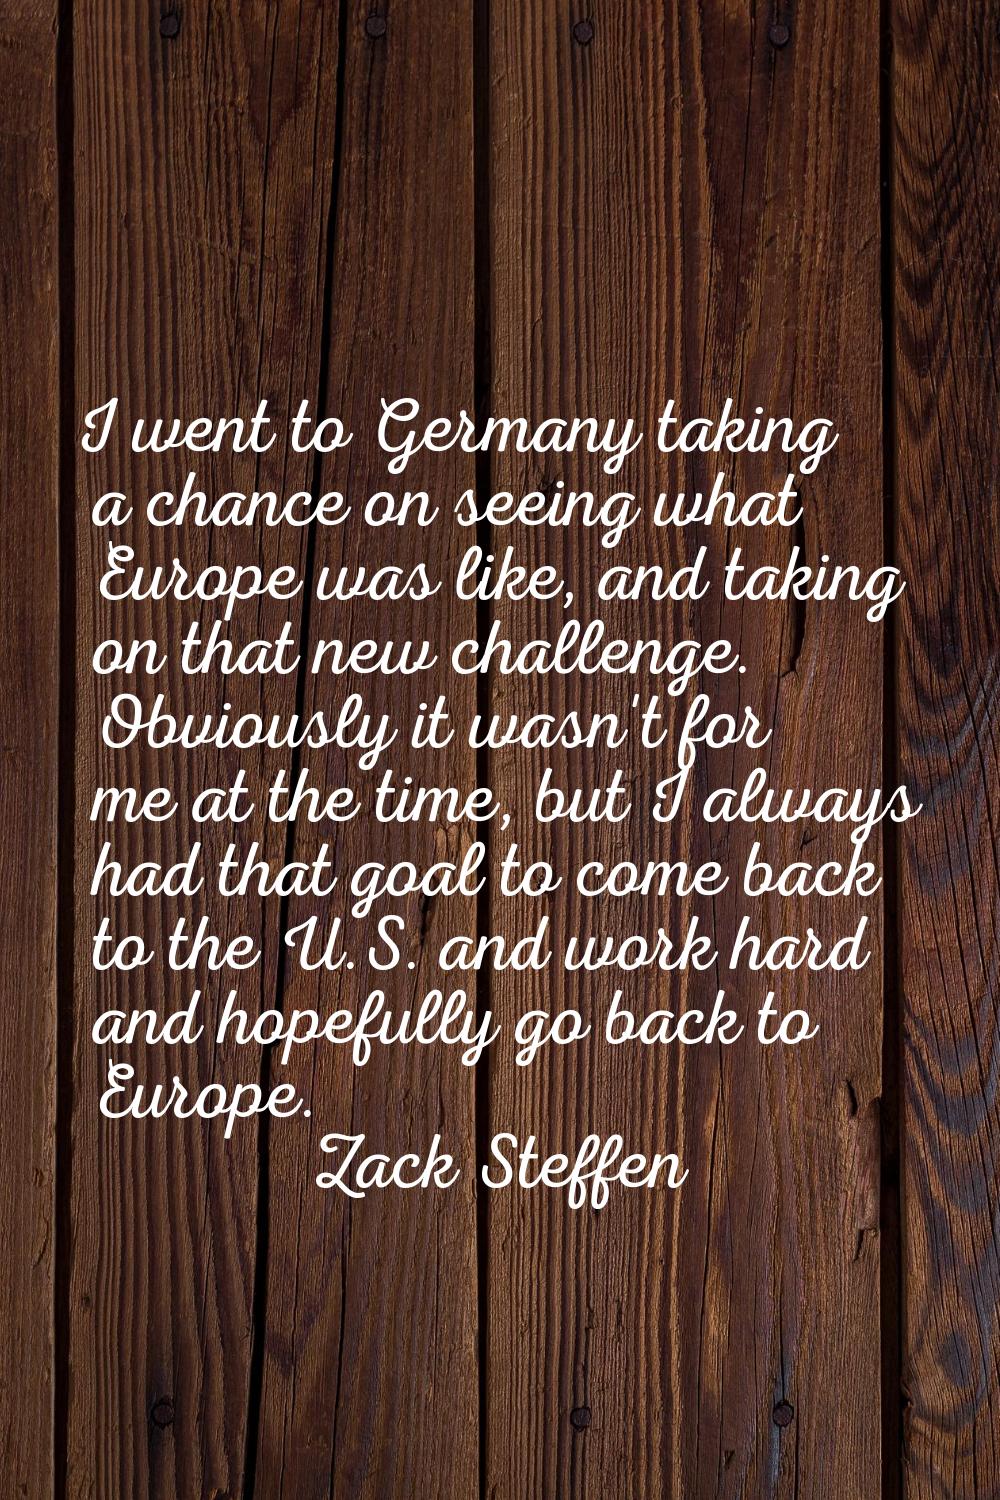 I went to Germany taking a chance on seeing what Europe was like, and taking on that new challenge.